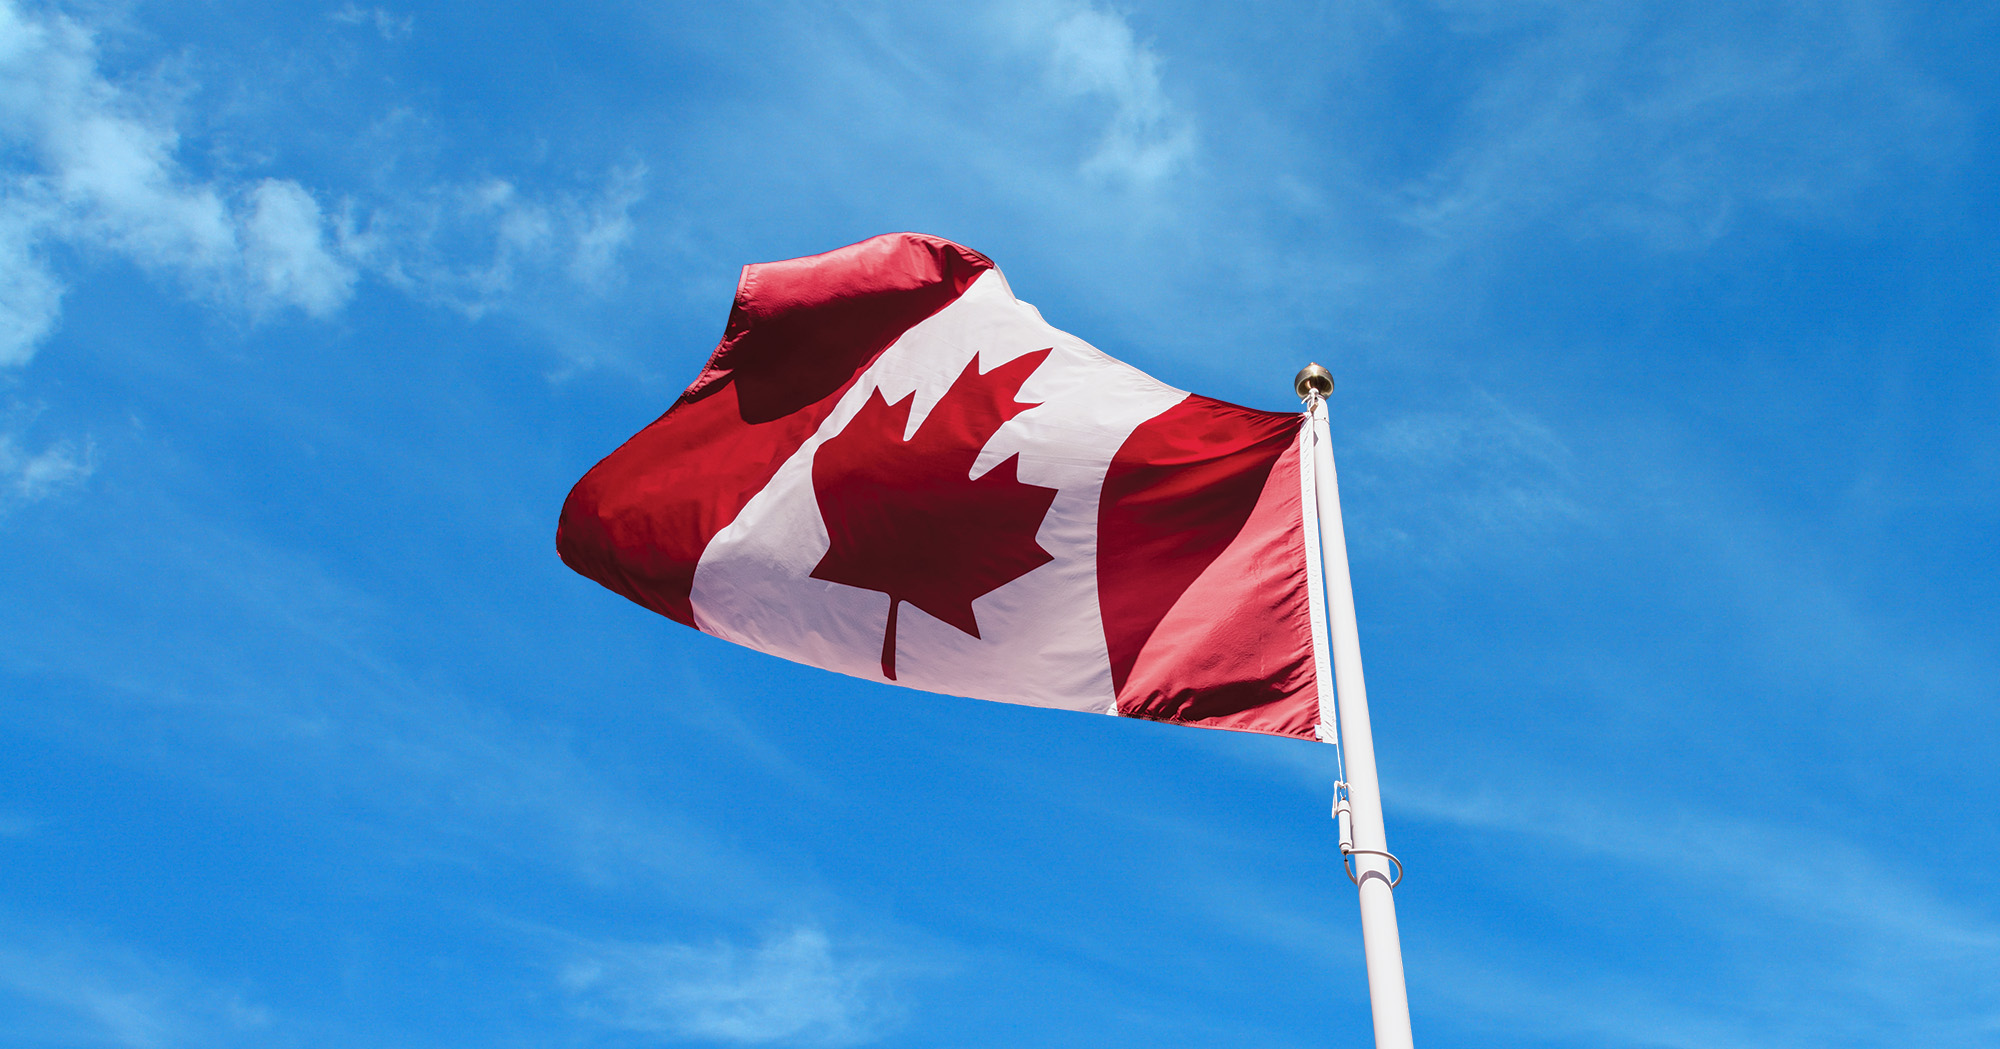 The Canadian flag billowing in the wind